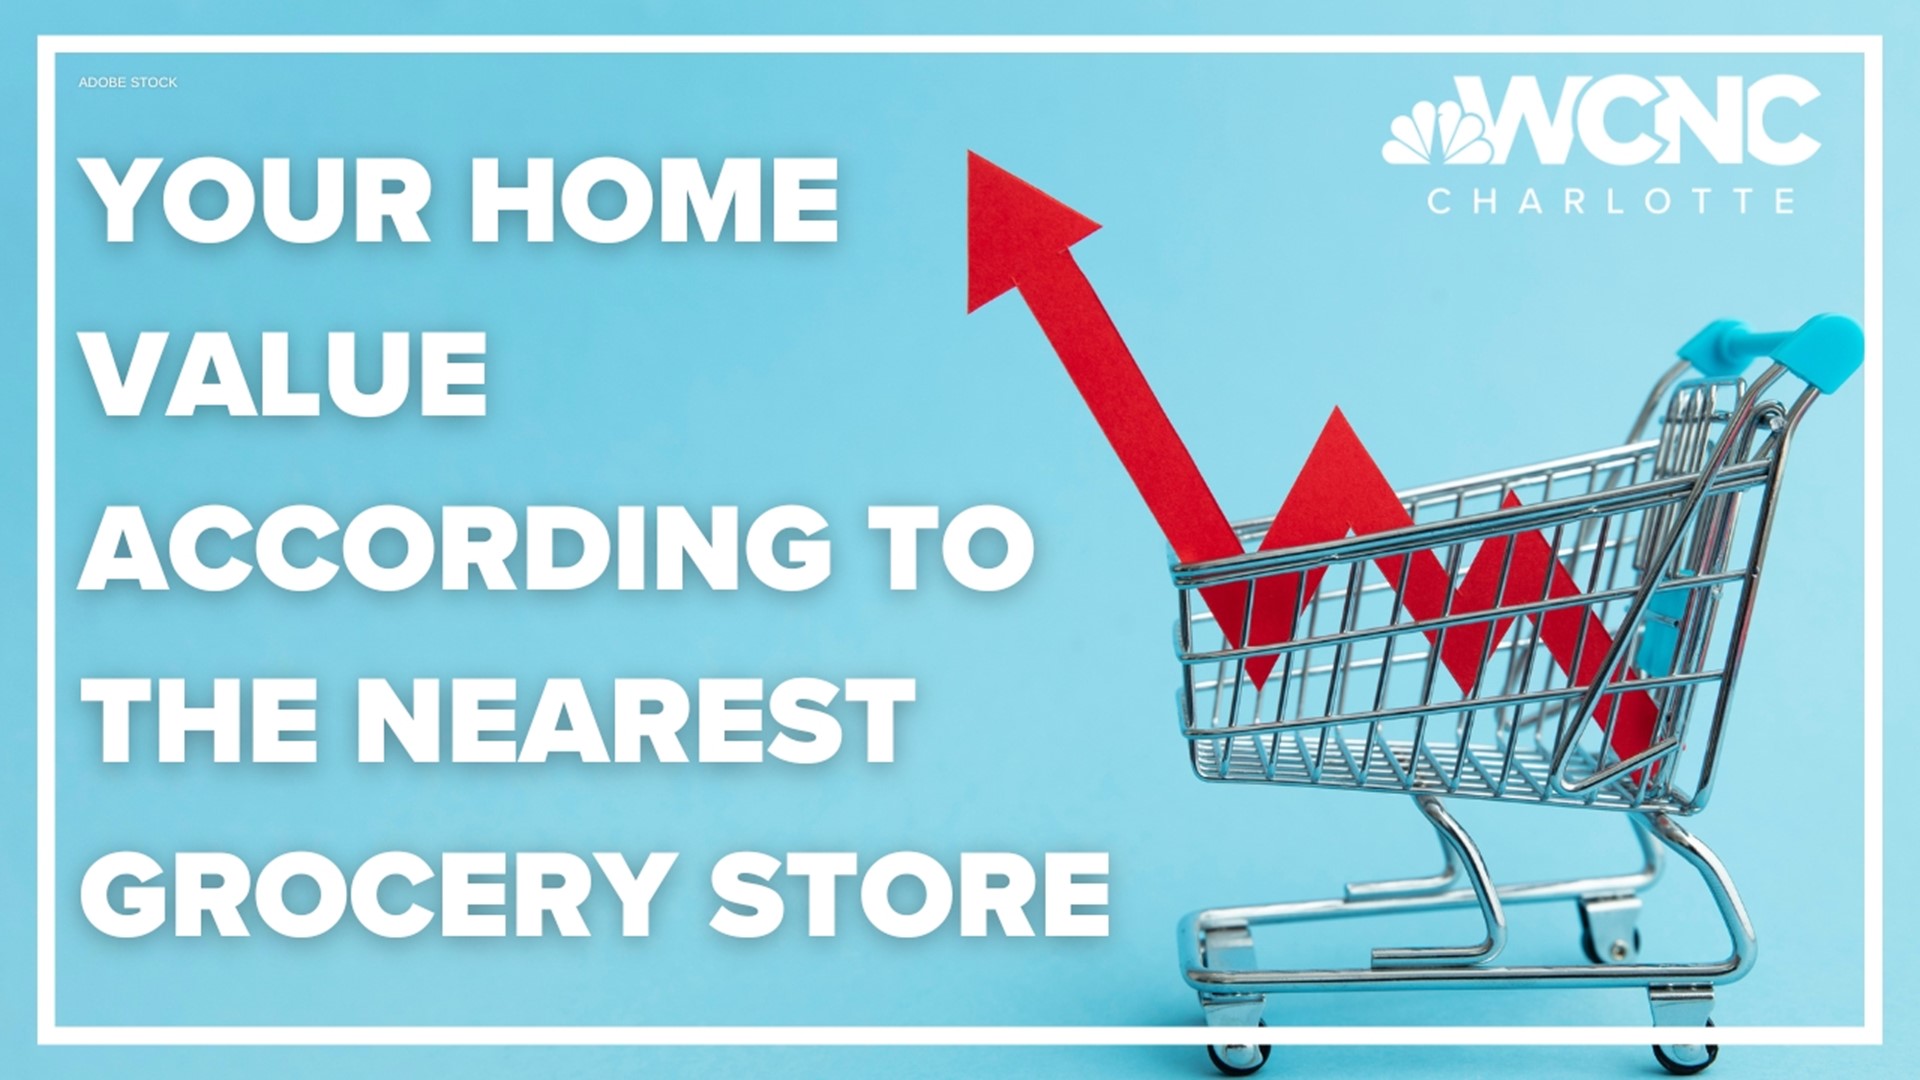 Grocery stores near your home can impact value